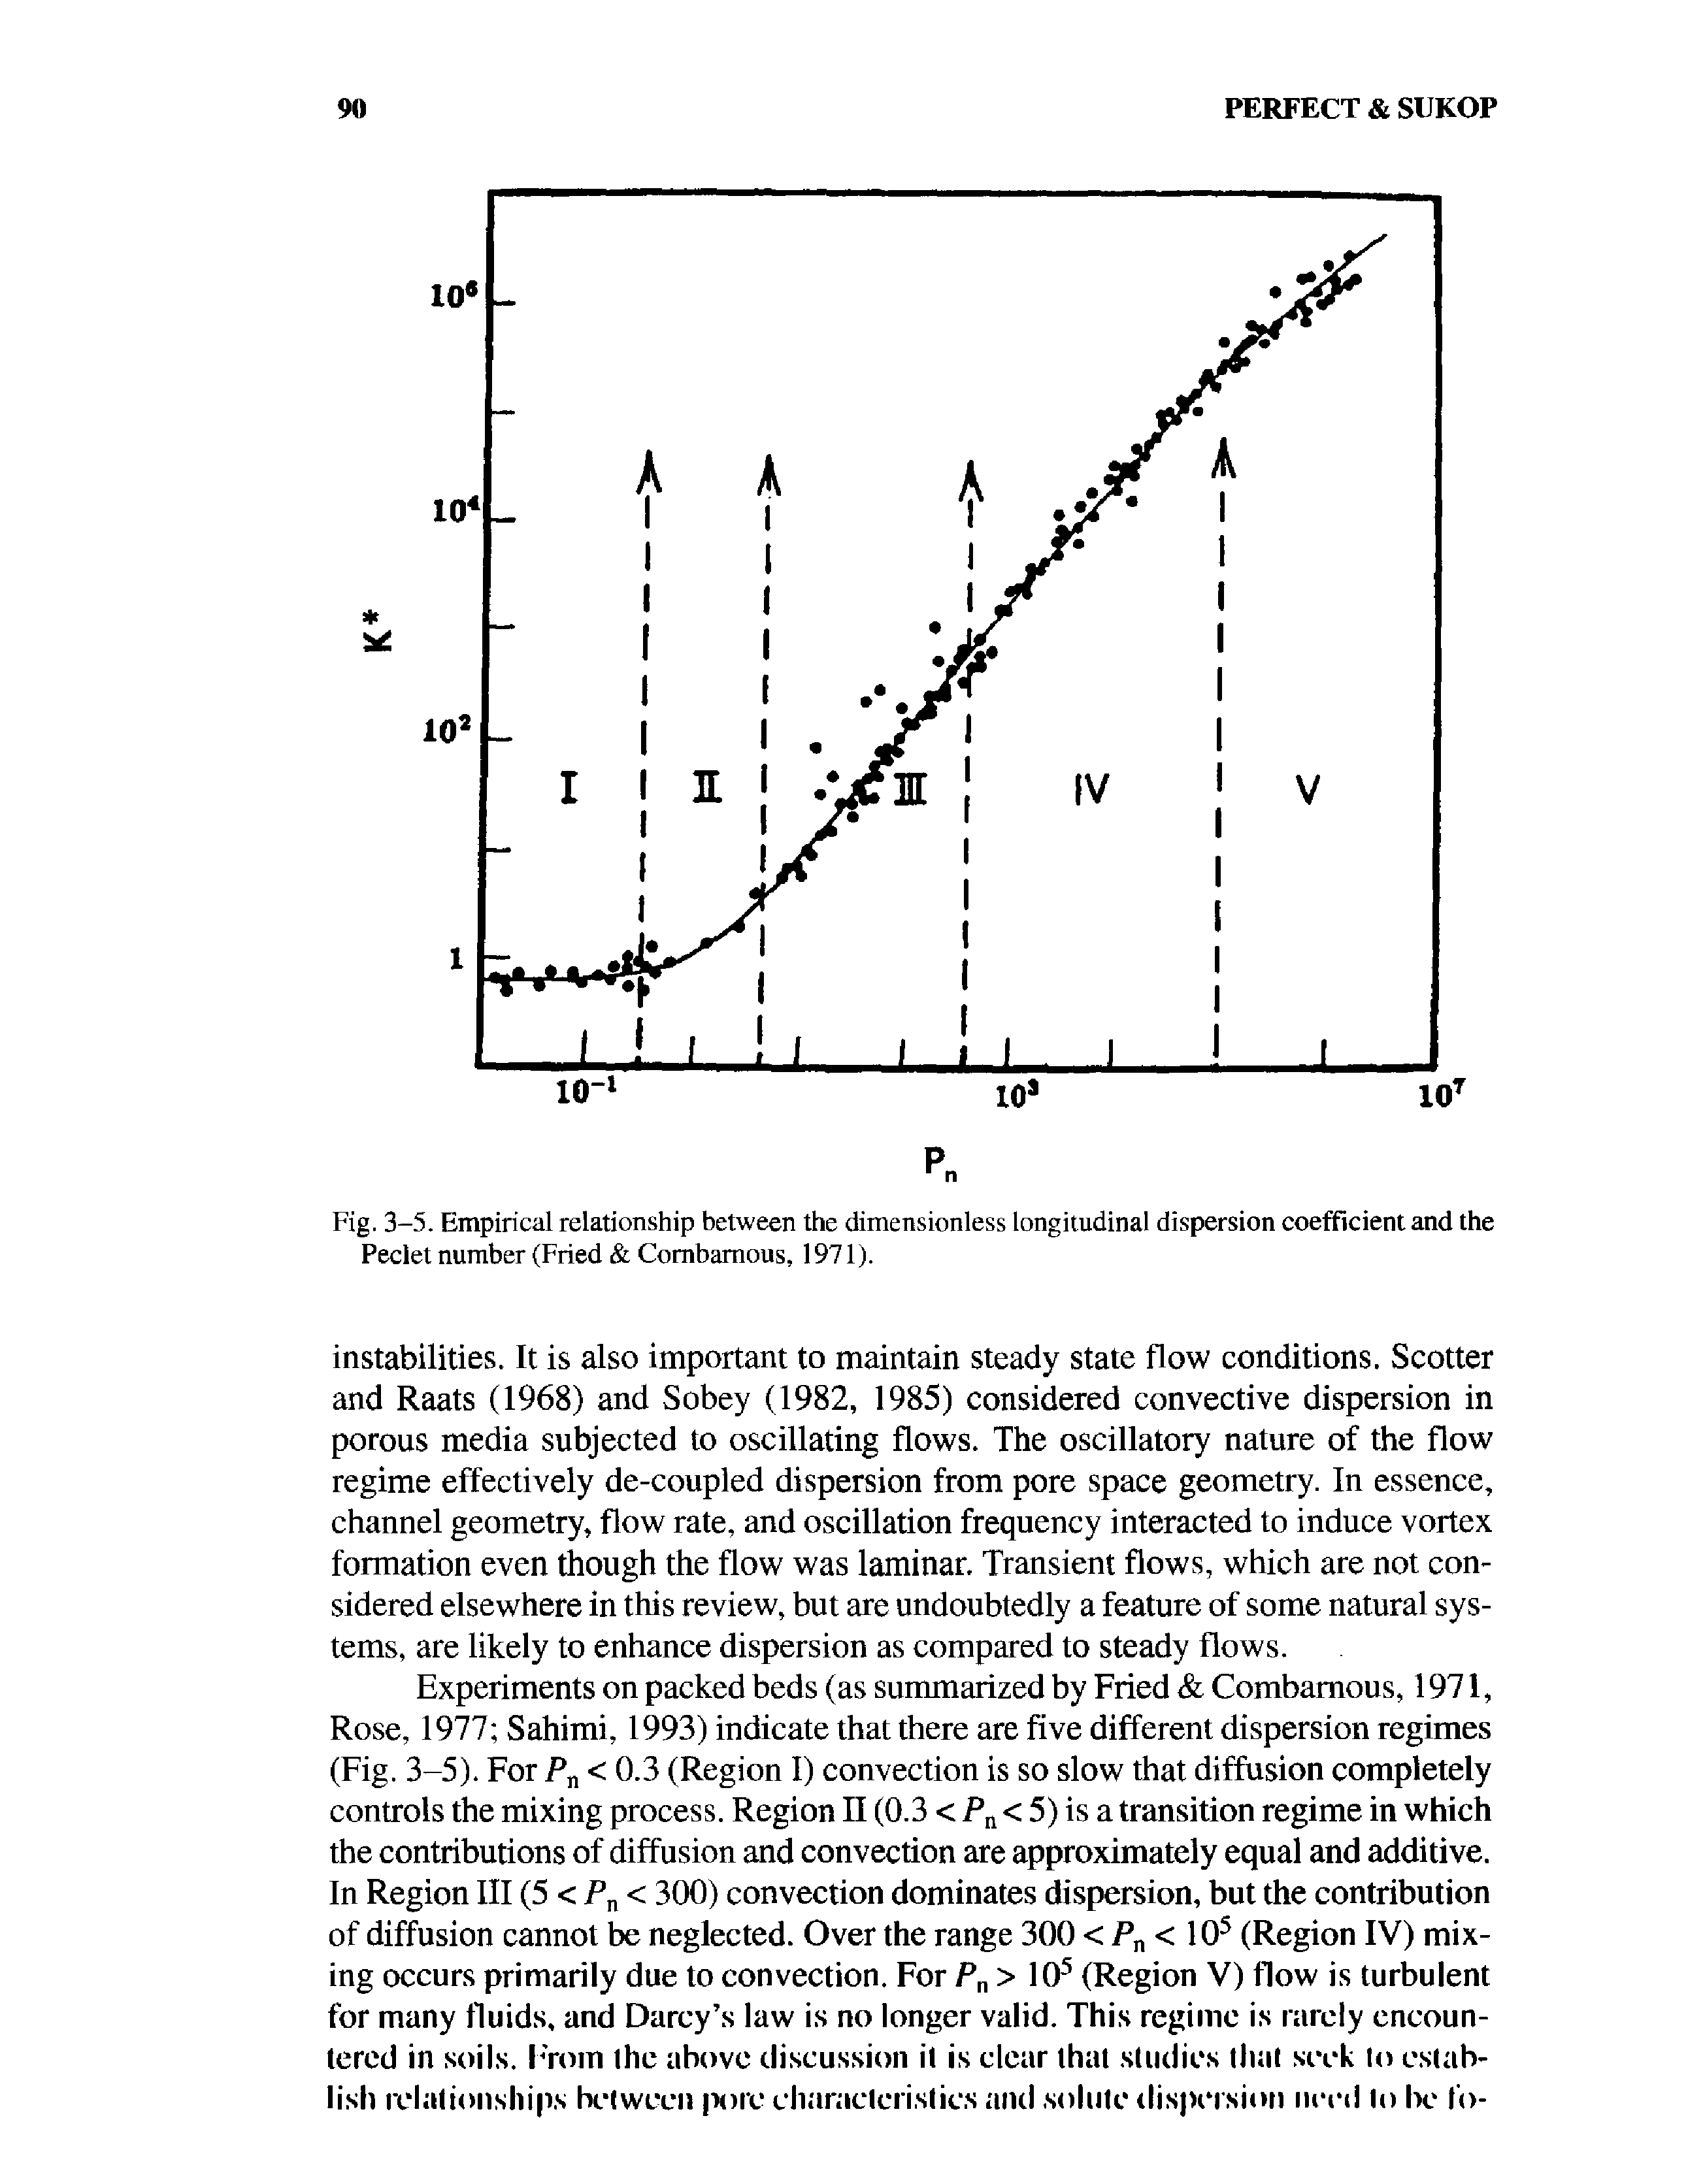 Fig. 3-5. Empirical relationship between the dimensionless longitudinal dispersion coefficient and the Peclet number (Fried Combamous, 1971).